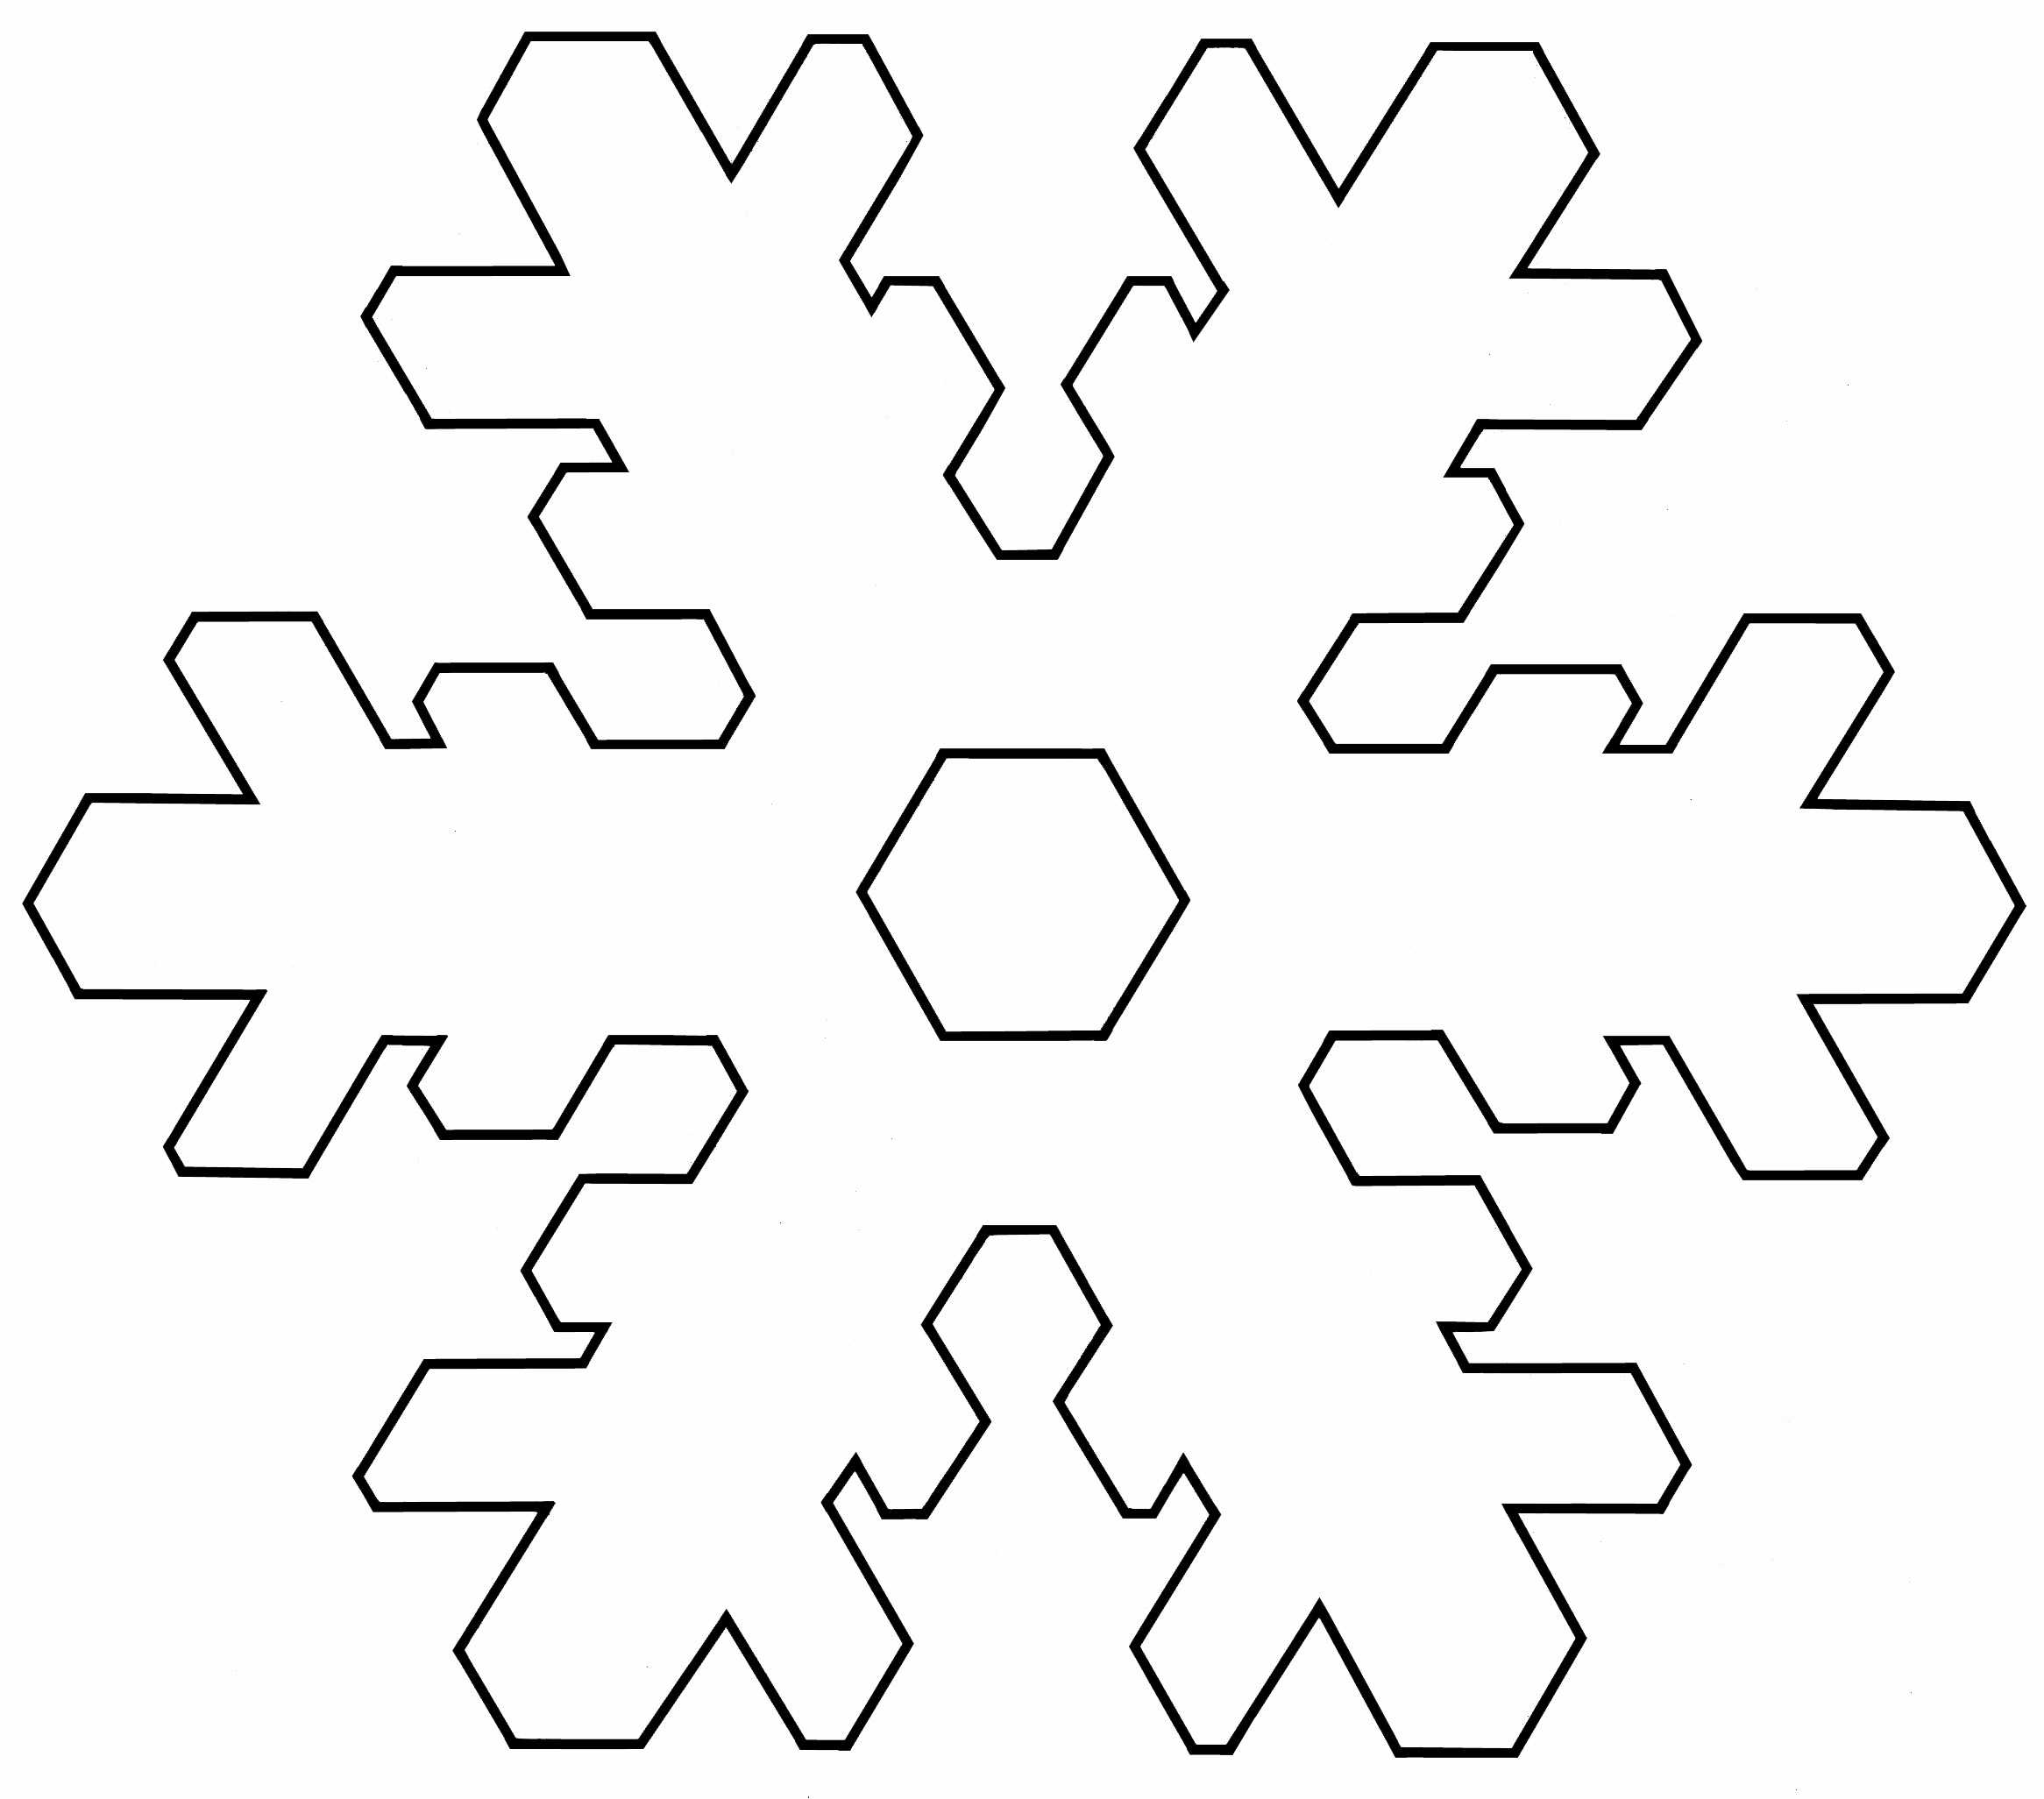 Snowflake Template With 6 Points | Templates And Samples Pertaining To Blank Snowflake Template